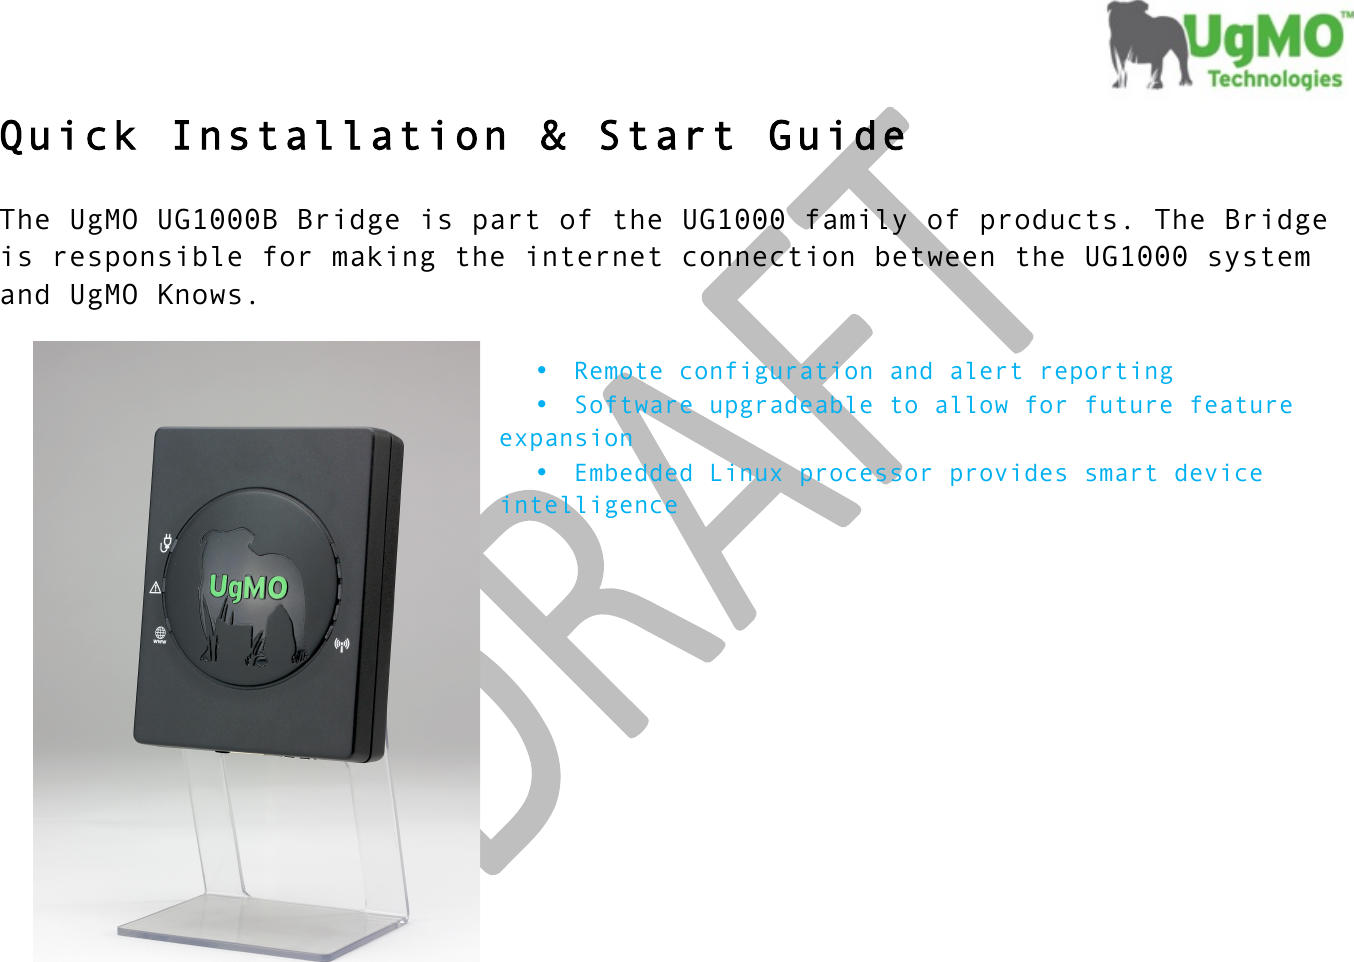 !! !  Quick Installation &amp; Start Guide  The UgMO UG1000B Bridge is part of the UG1000 family of products. The Bridge is responsible for making the internet connection between the UG1000 system and UgMO Knows.    • Remote configuration and alert reporting • Software upgradeable to allow for future feature expansion • Embedded Linux processor provides smart device intelligence           